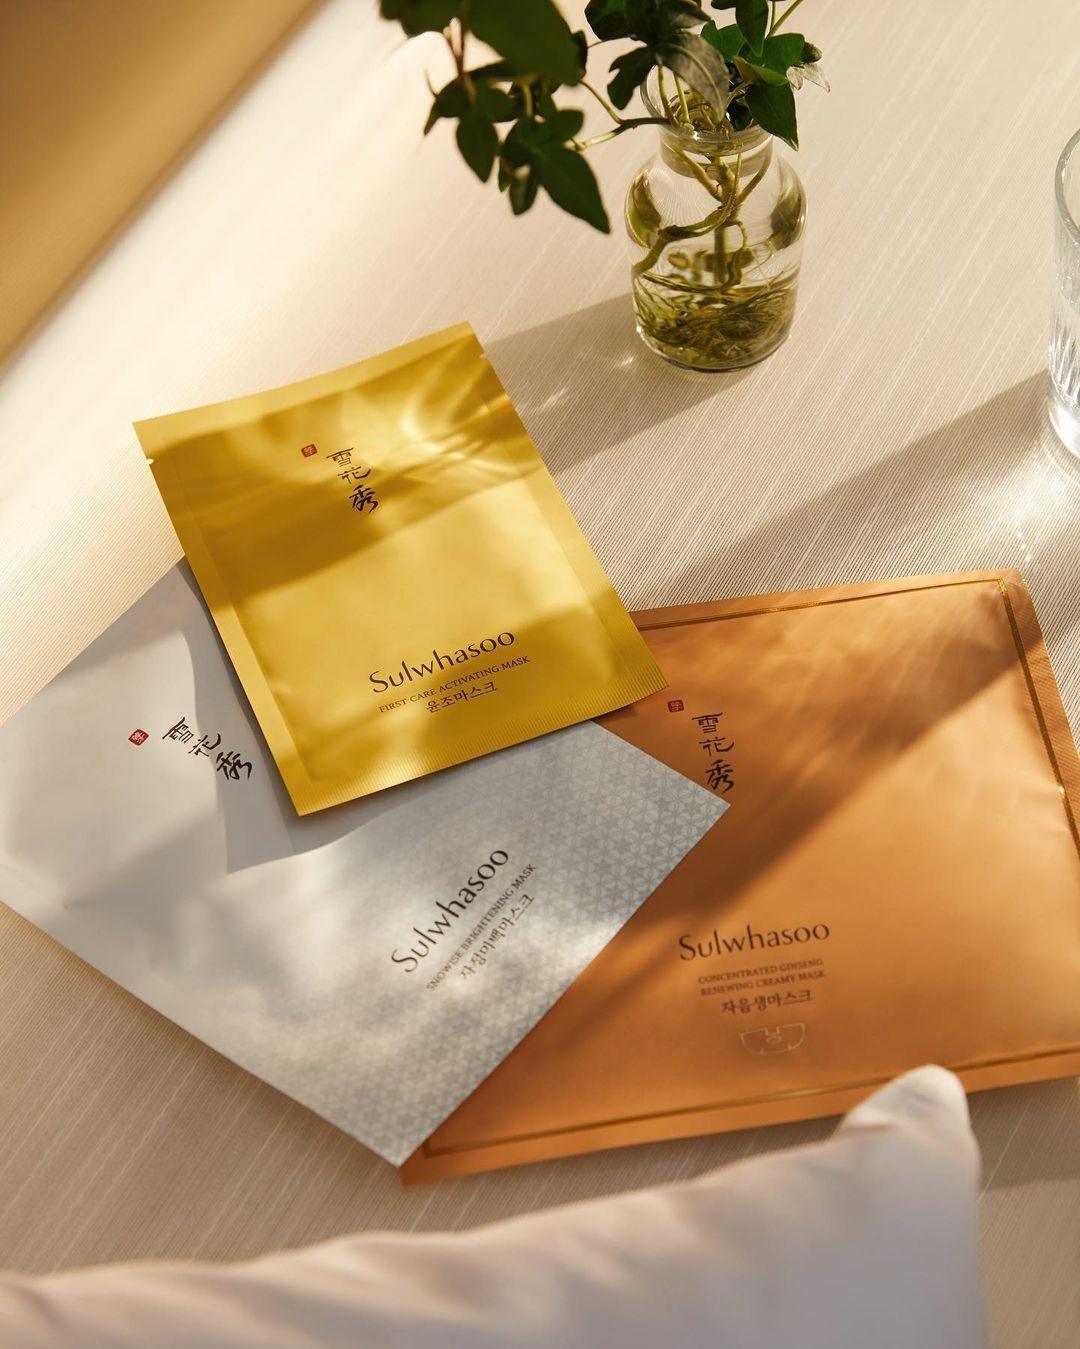 Mặt Nạ Sulwhasoo First Care Activating Mask EX - Kallos Vietnam